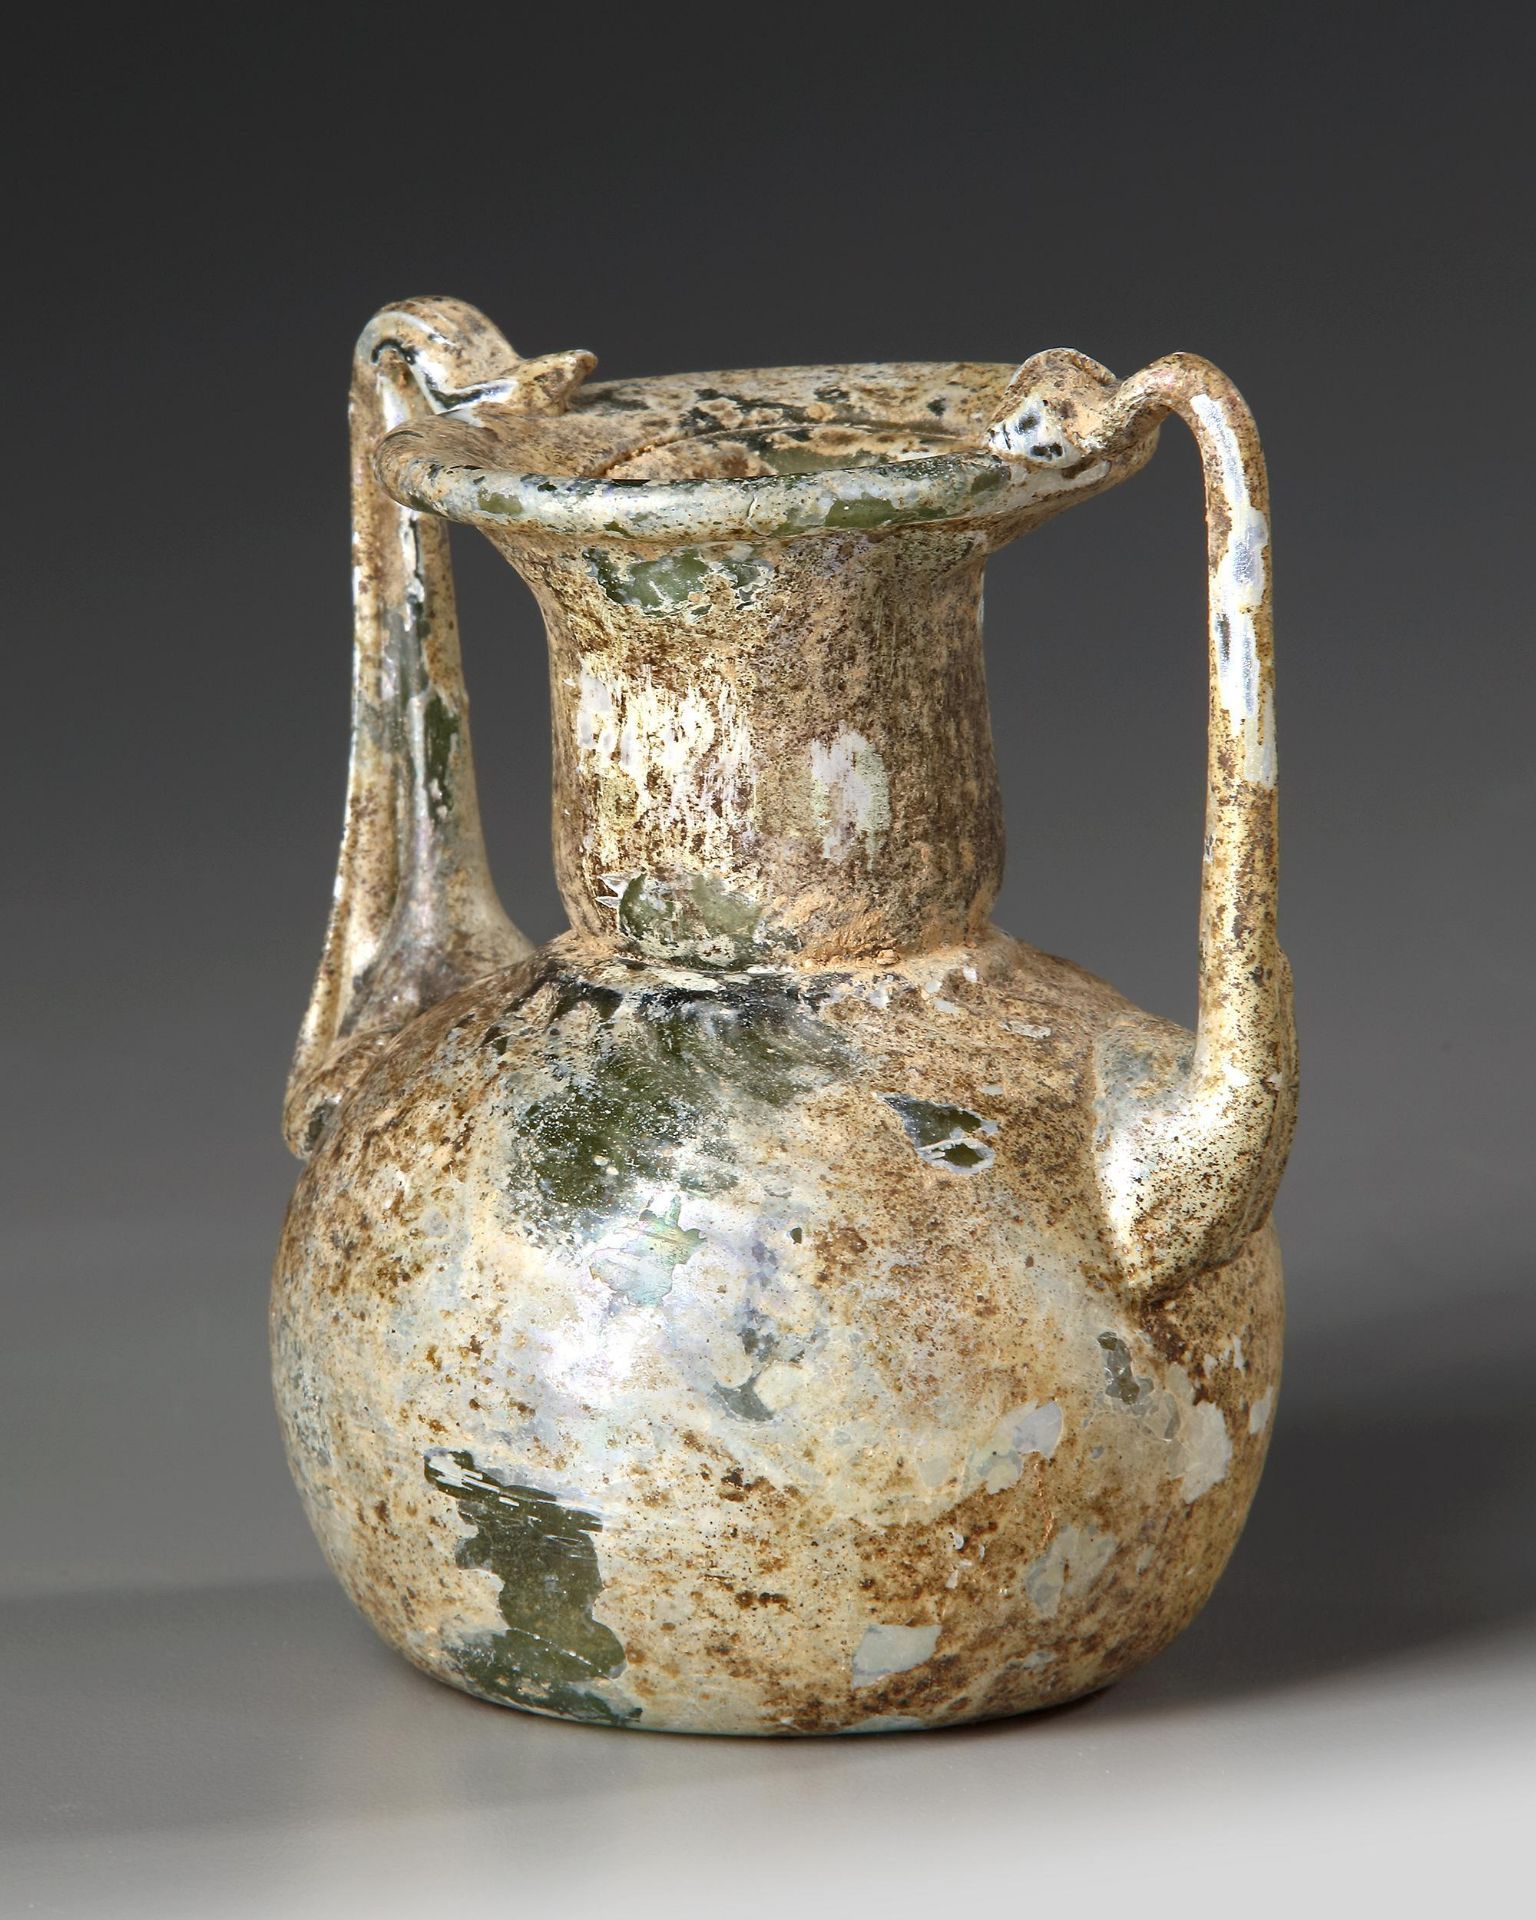 A ROMAN GLASS JAR WITH TWO HANDLES, CIRCA 3RD-4TH CENTURY A.D. - Image 4 of 4